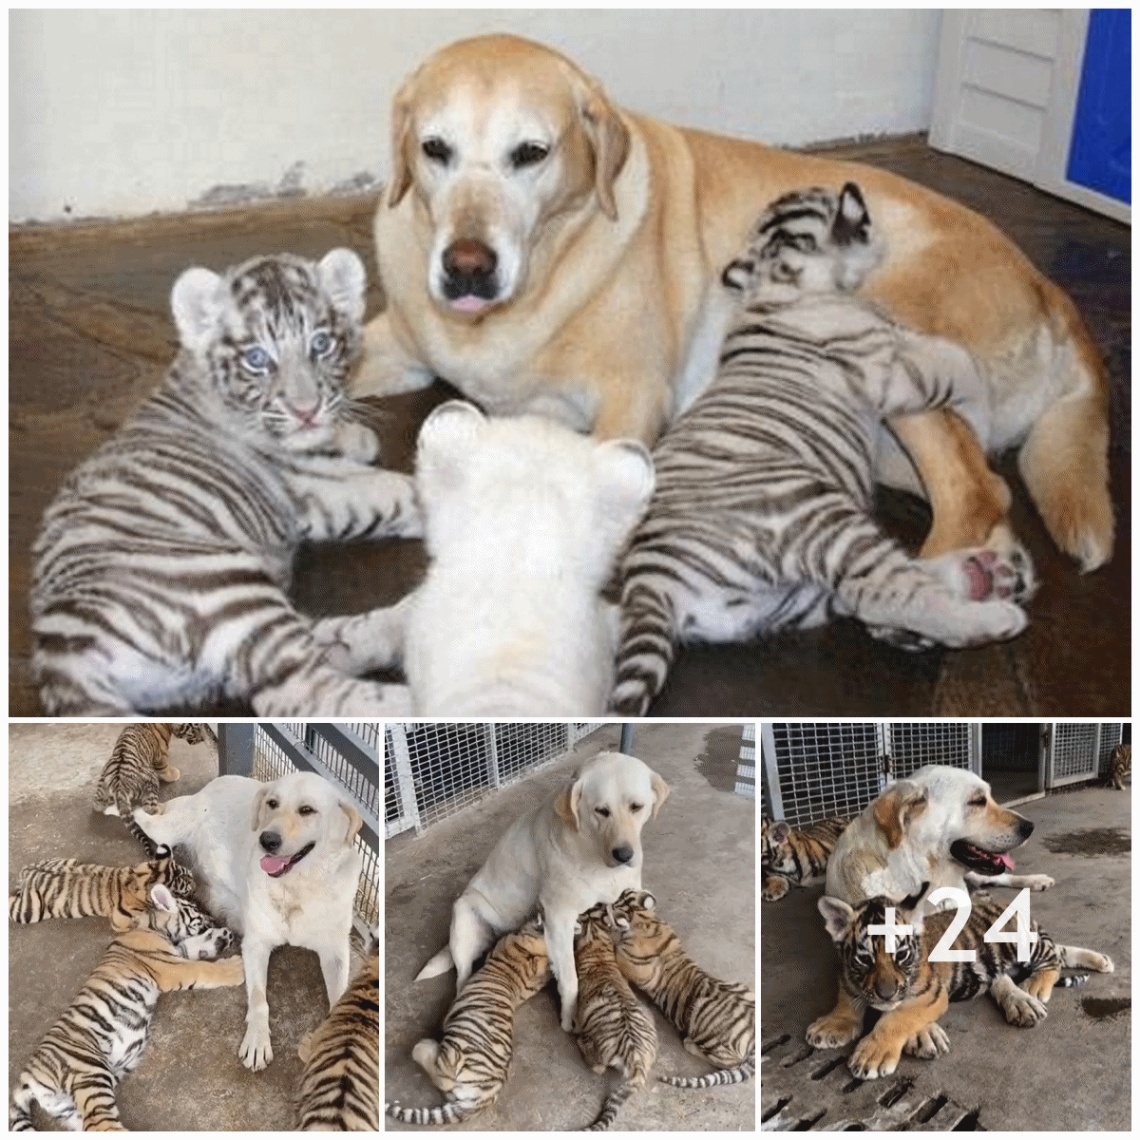 Grateful affection: The mother dog raises the tiger cubs as her own children, living in a natural way according to her style.